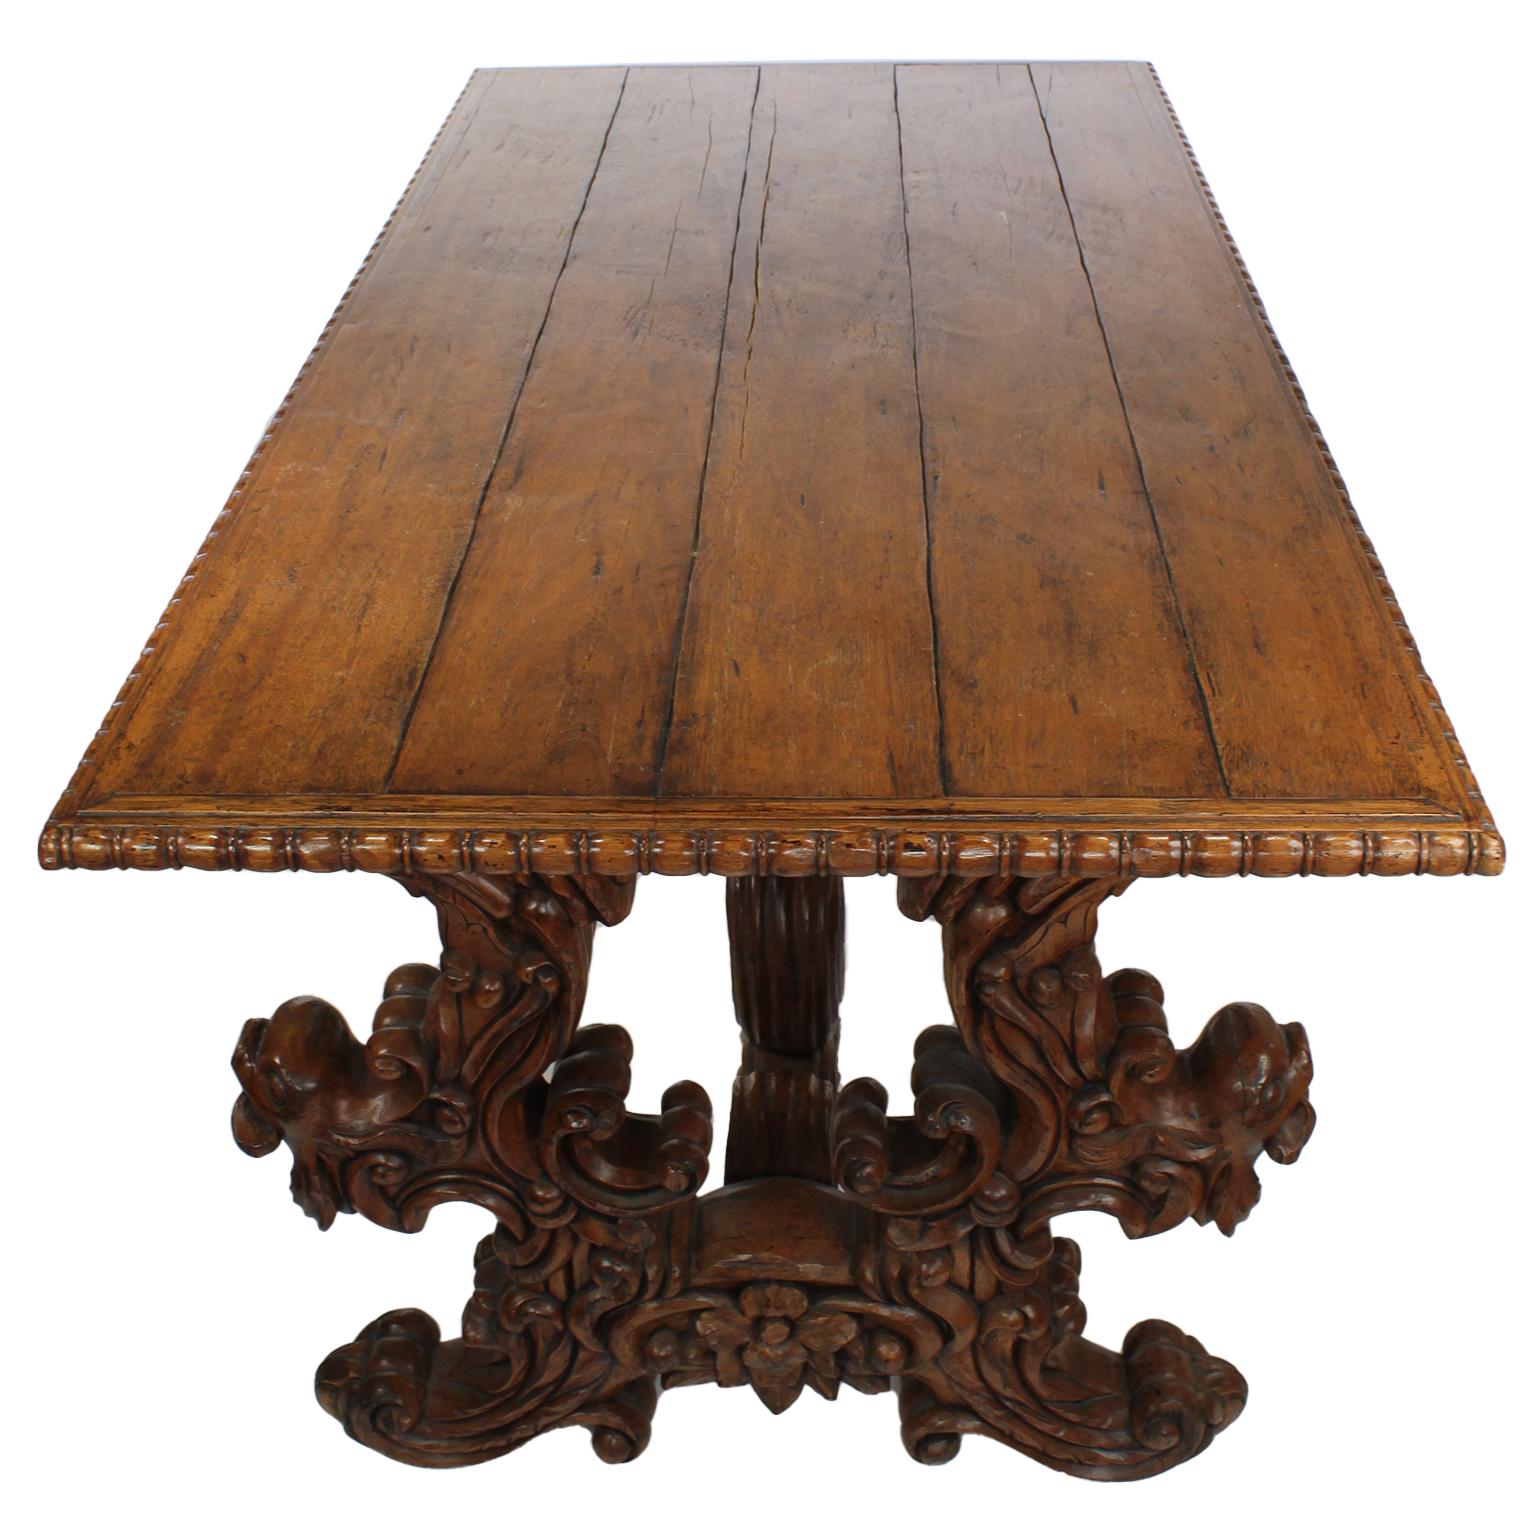 20th Century Baroque Revival Style Carved Wood Tavern or Farm Dining Pedestal Table For Sale